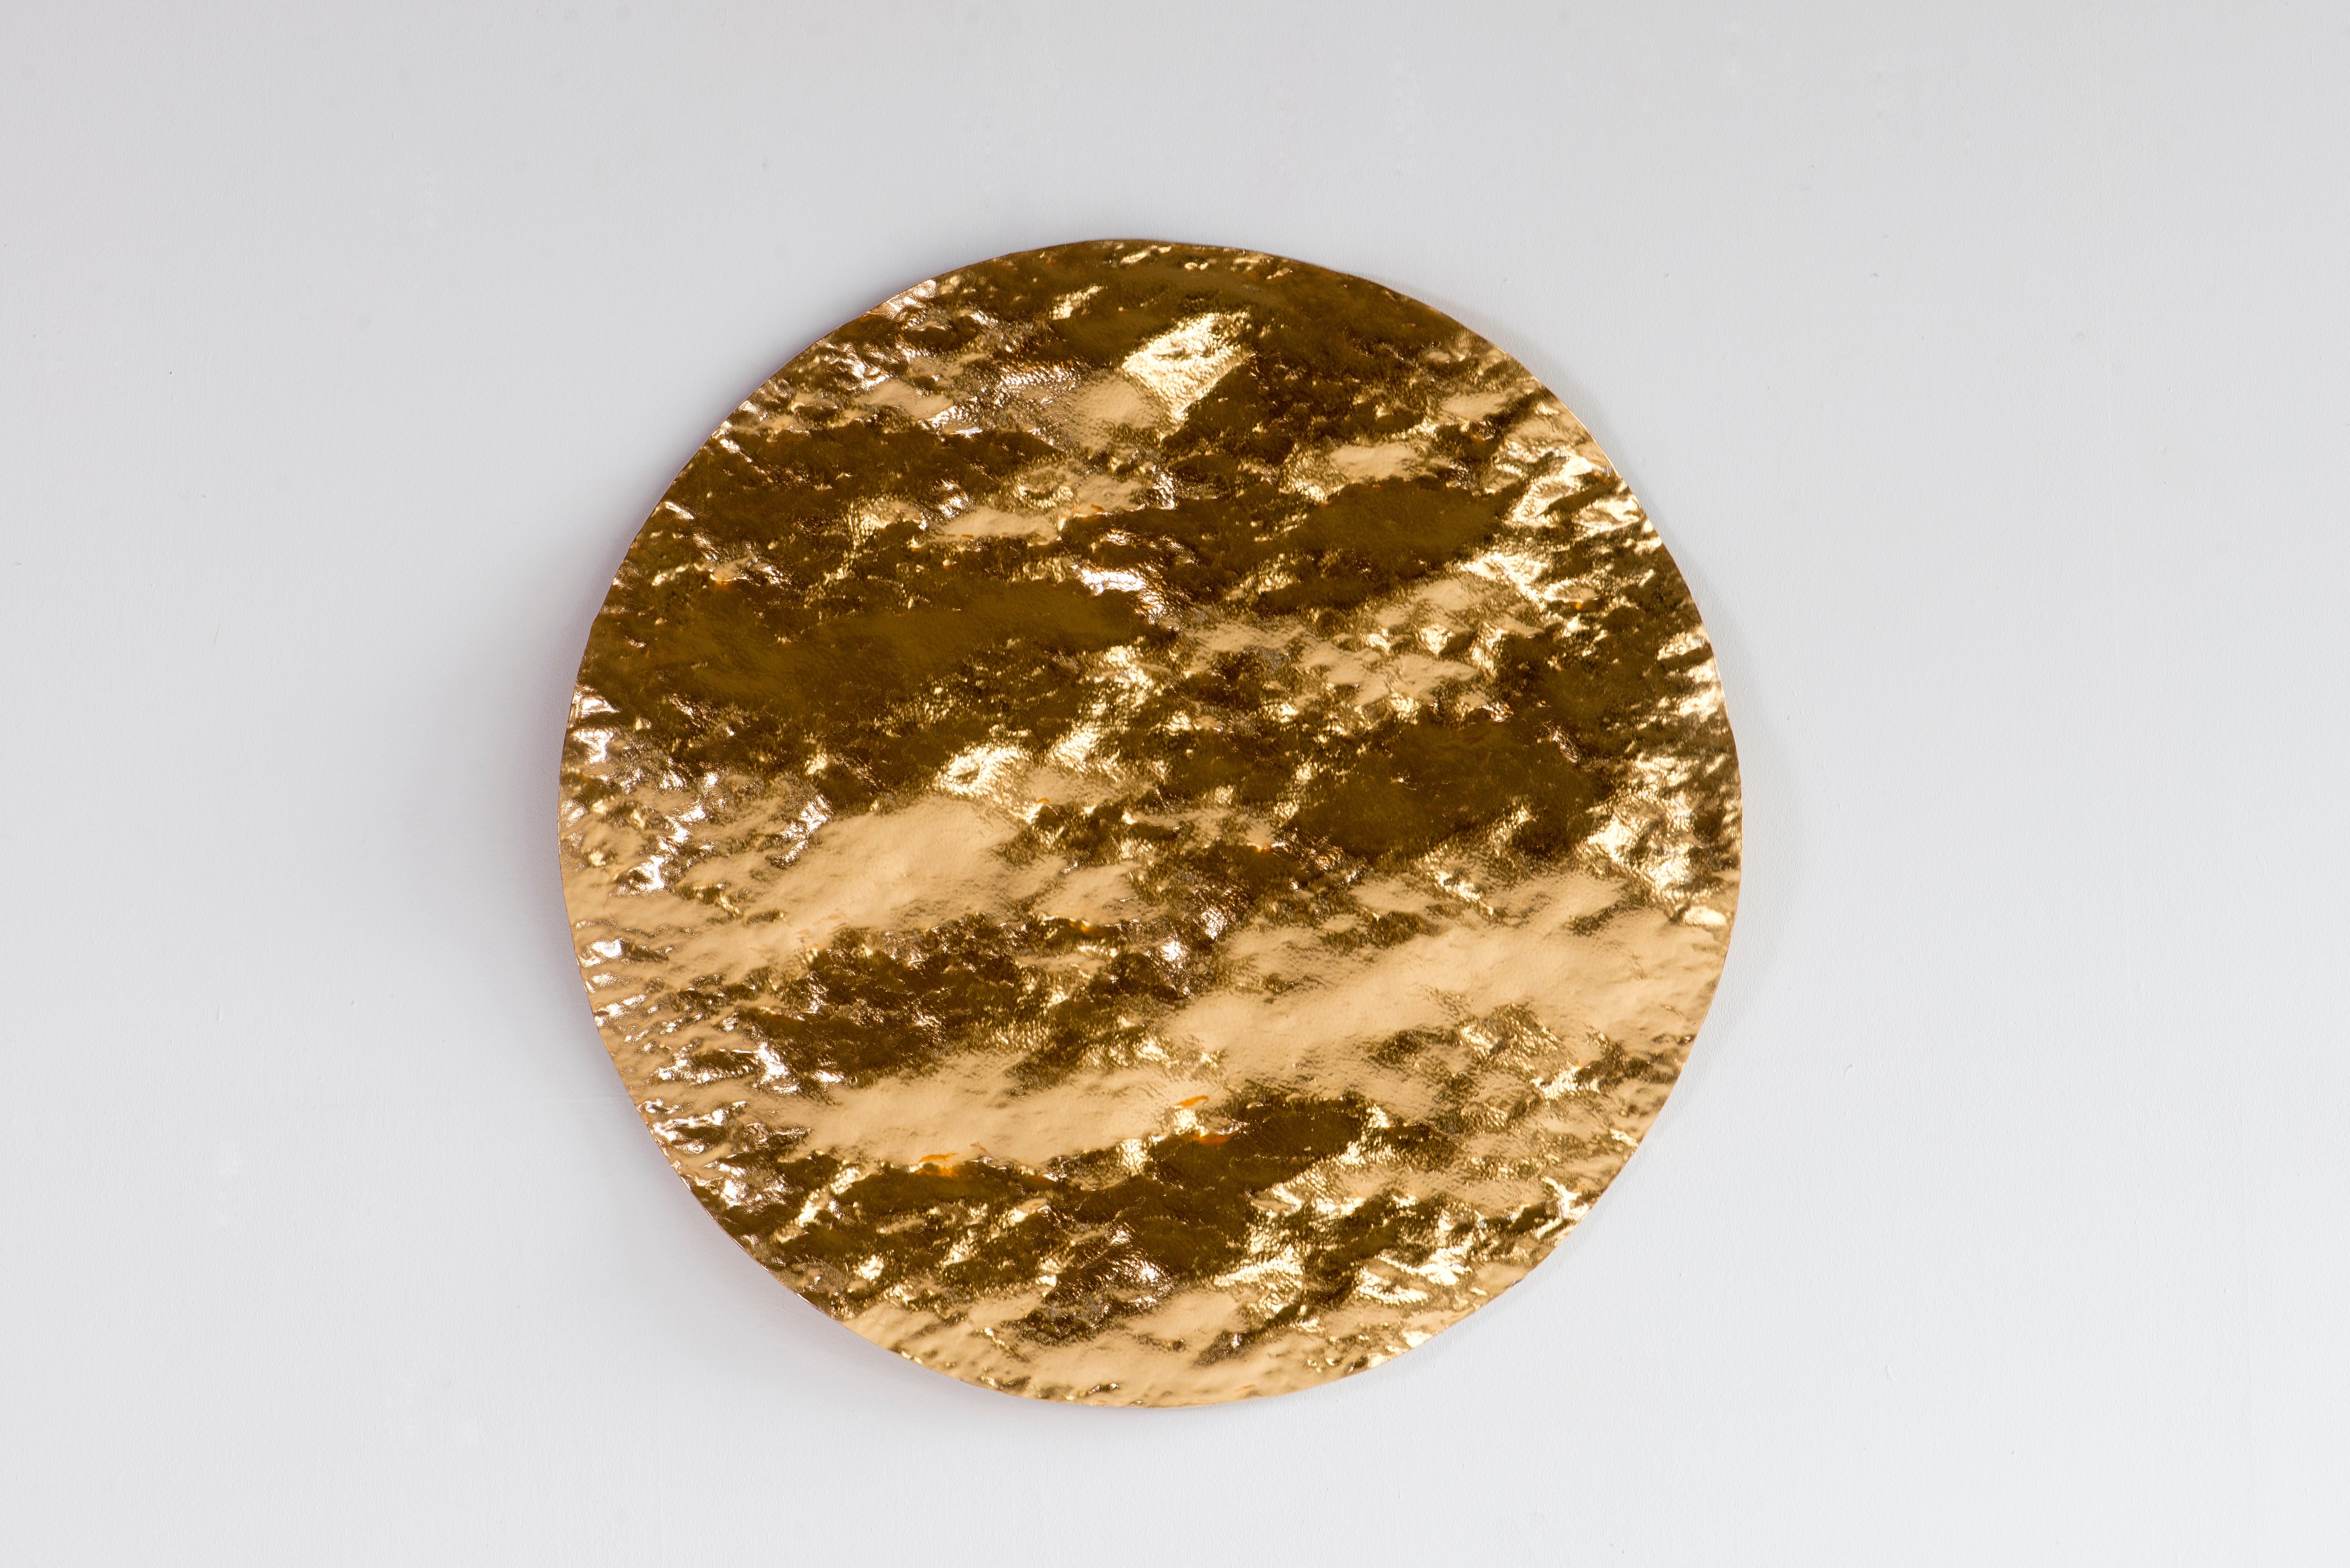 Ocean Sunset #1 -abstract textural round mural glass sculpture with gold leaves 